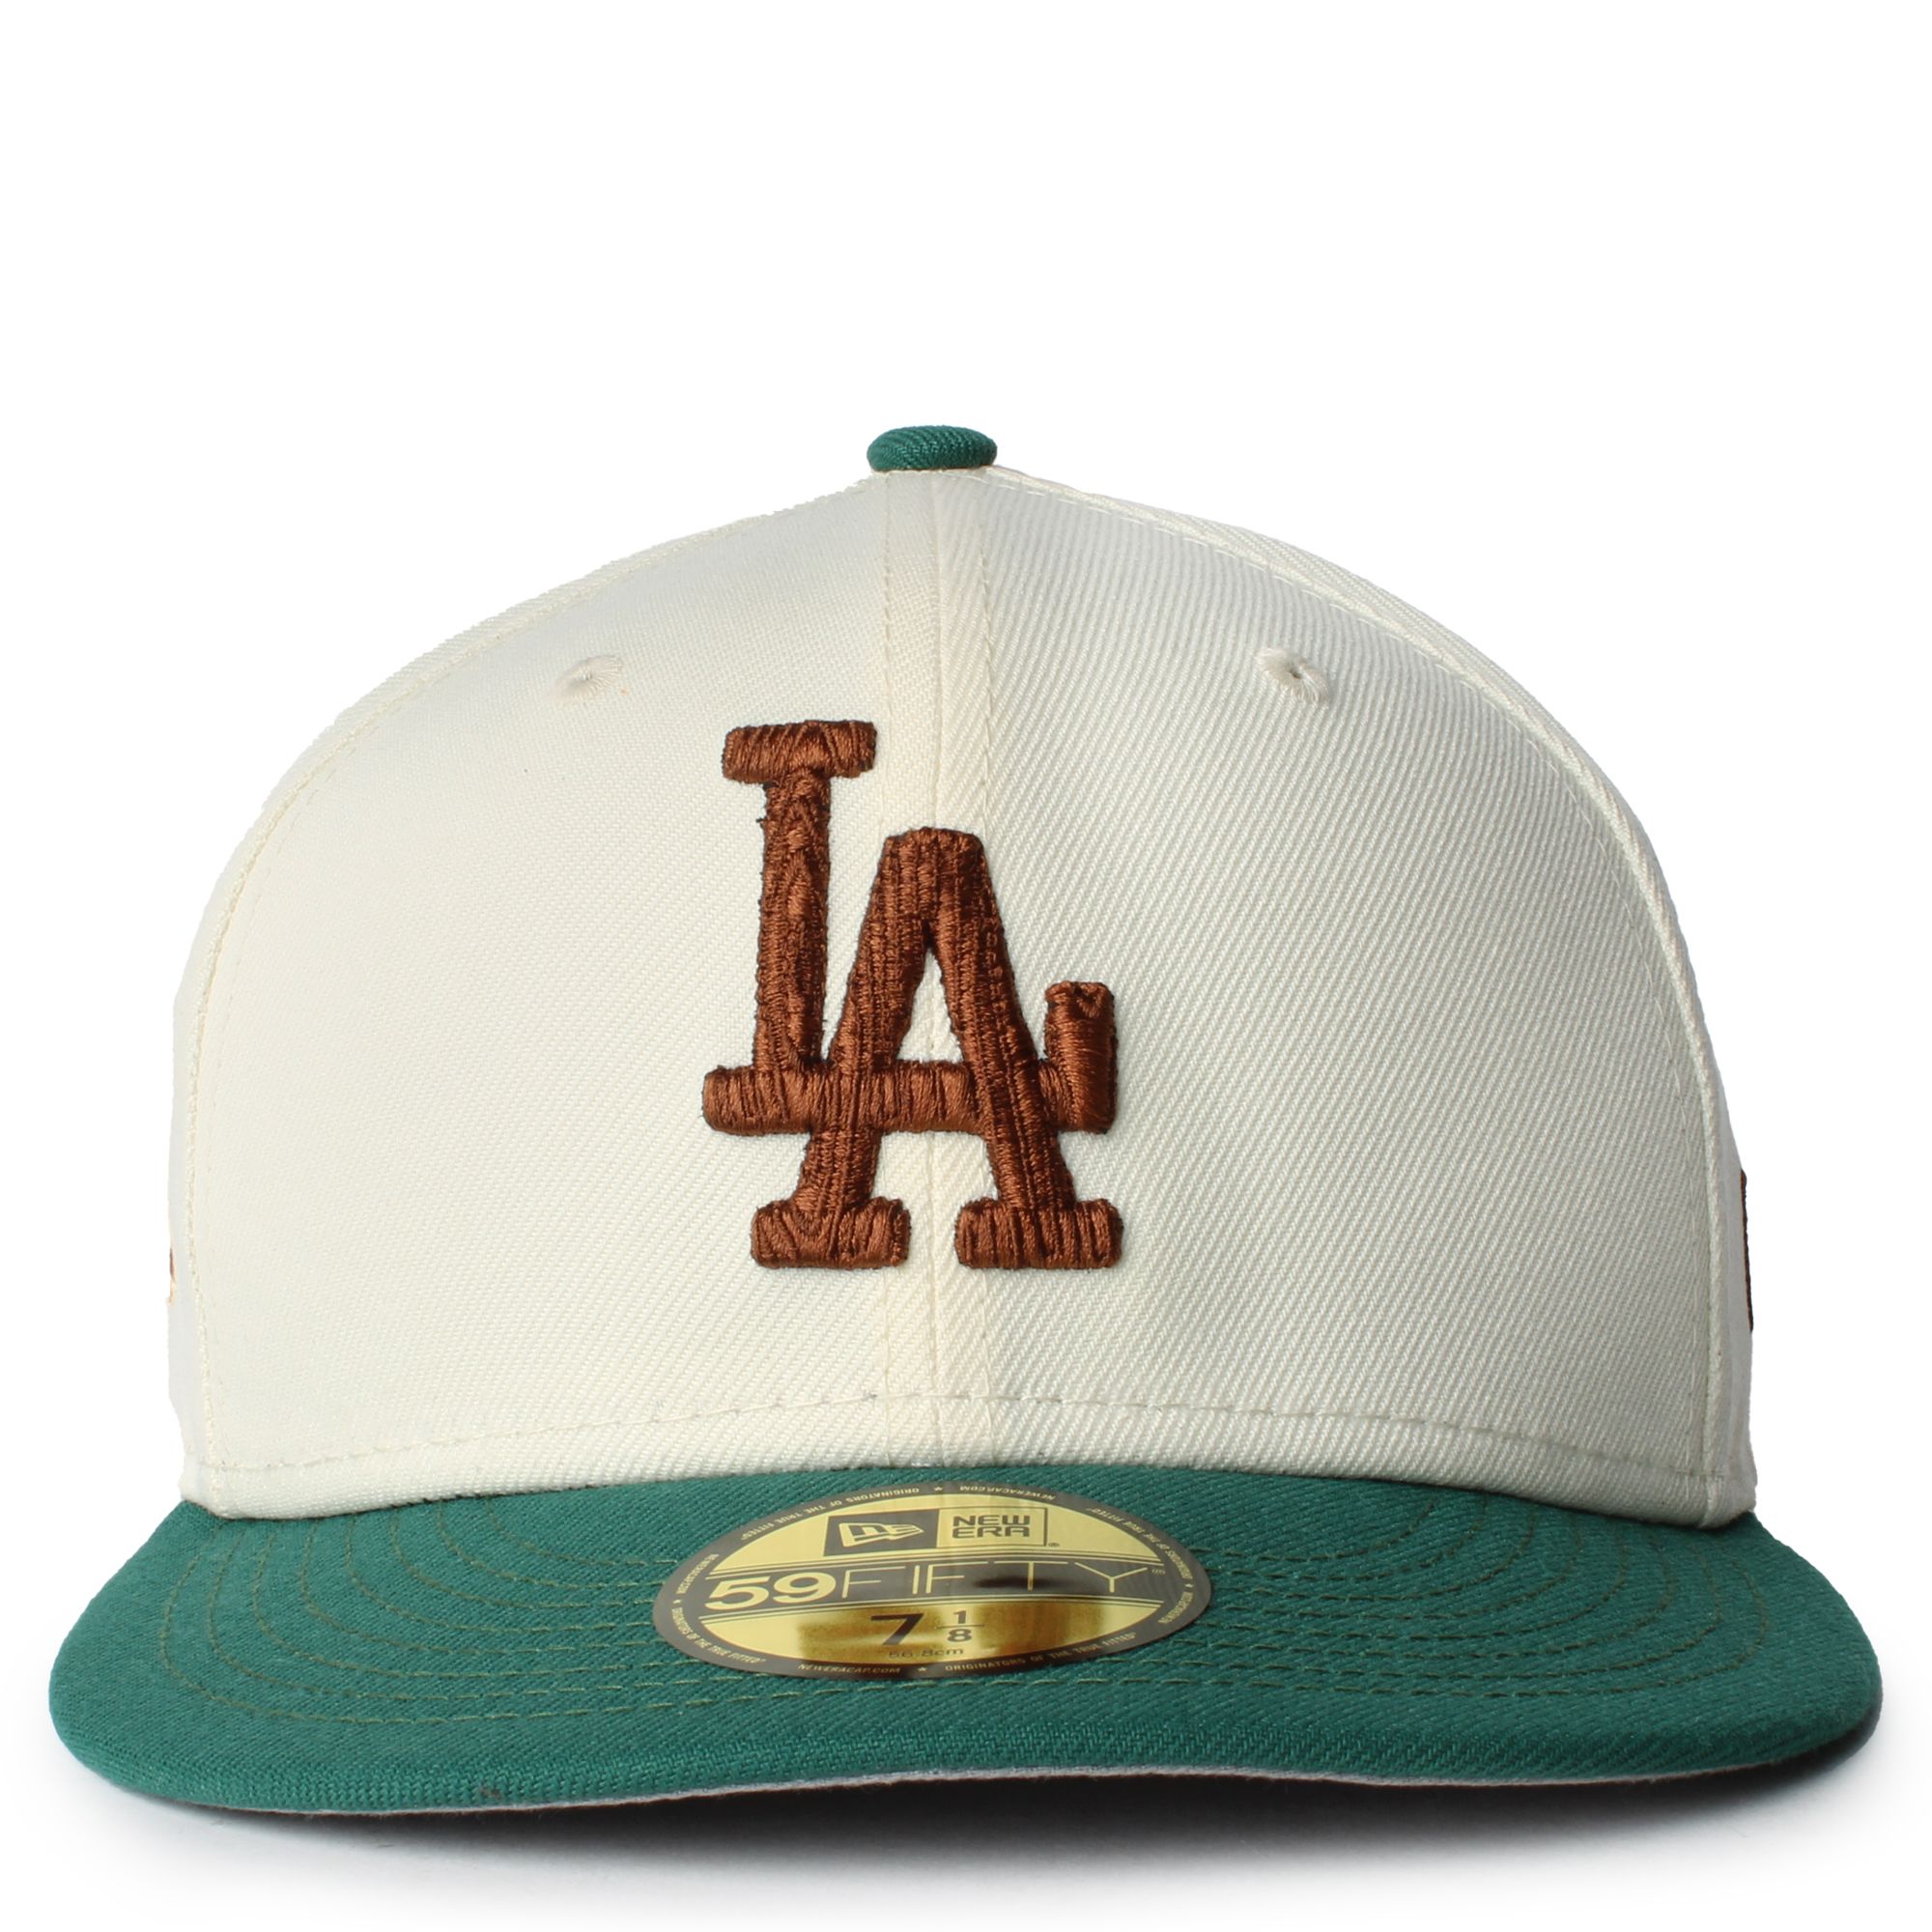 New Era 59FIFTY Los Angeles Dodgers Camp Chrome Fitted Hat White Green